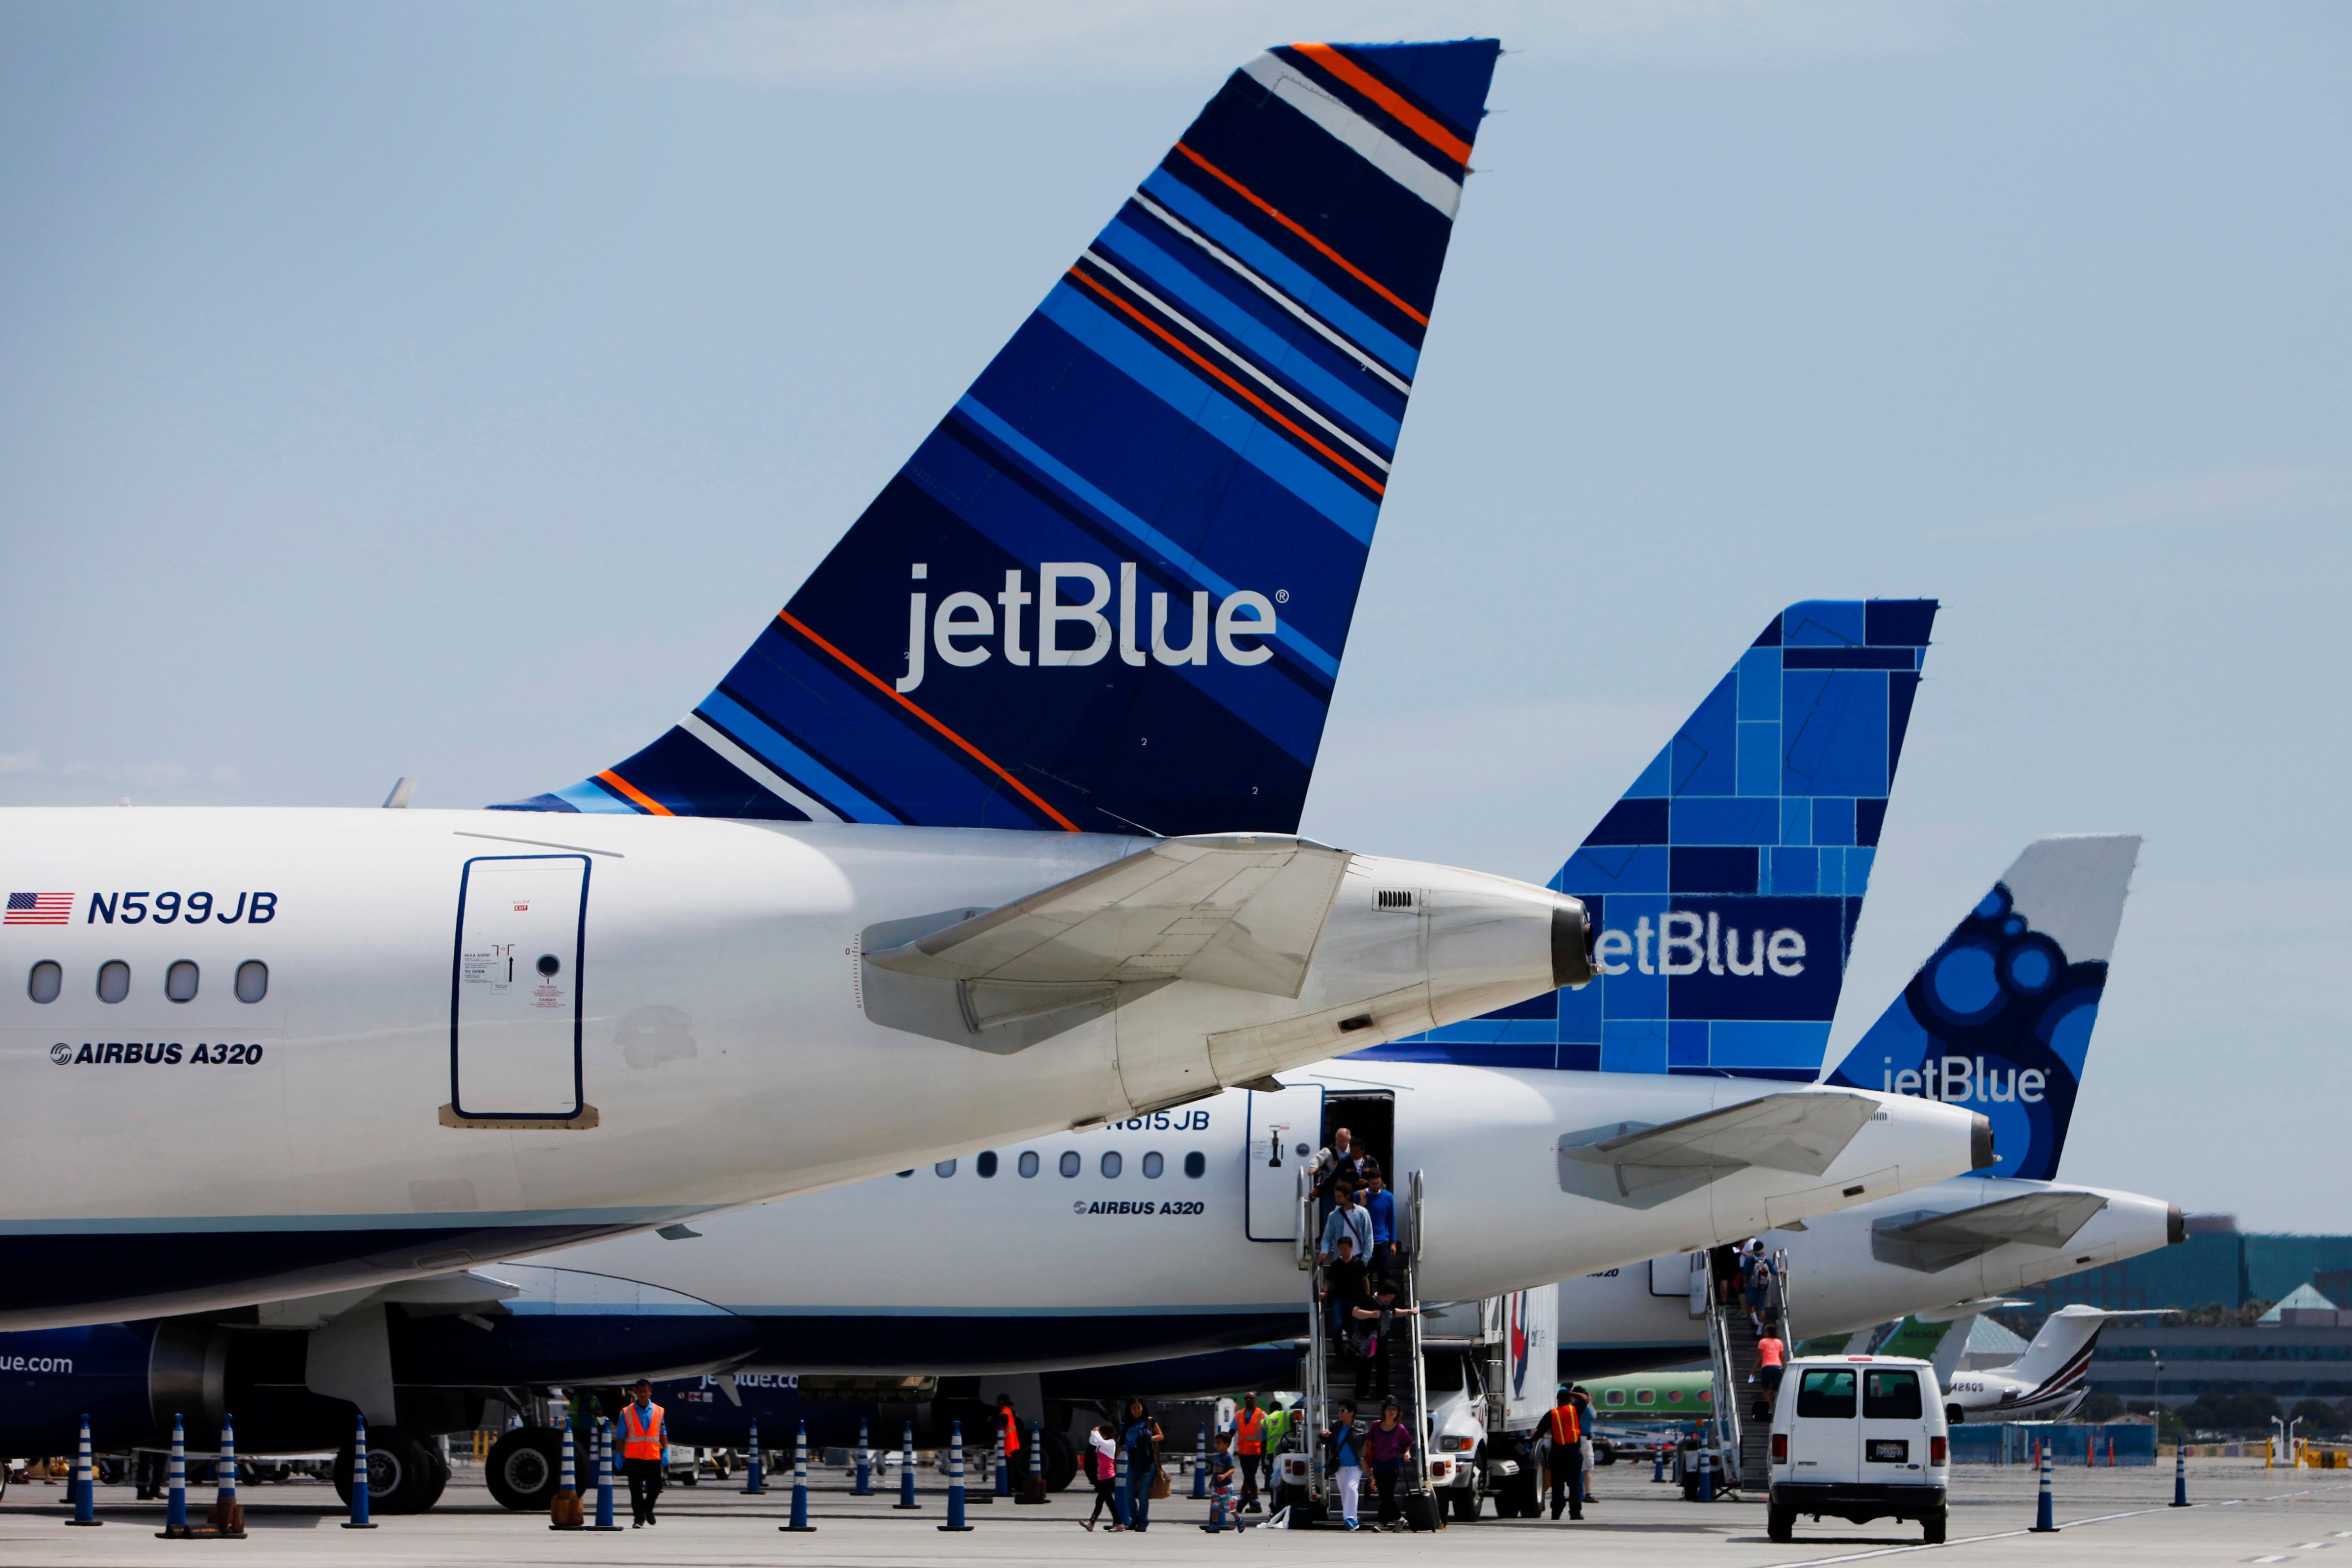 Passengers exit a JetBlue Airways Corp. plane at Long Beach Airport in Long Beach, Calif., on July 22, 2013. (Bloomberg via Getty Images)